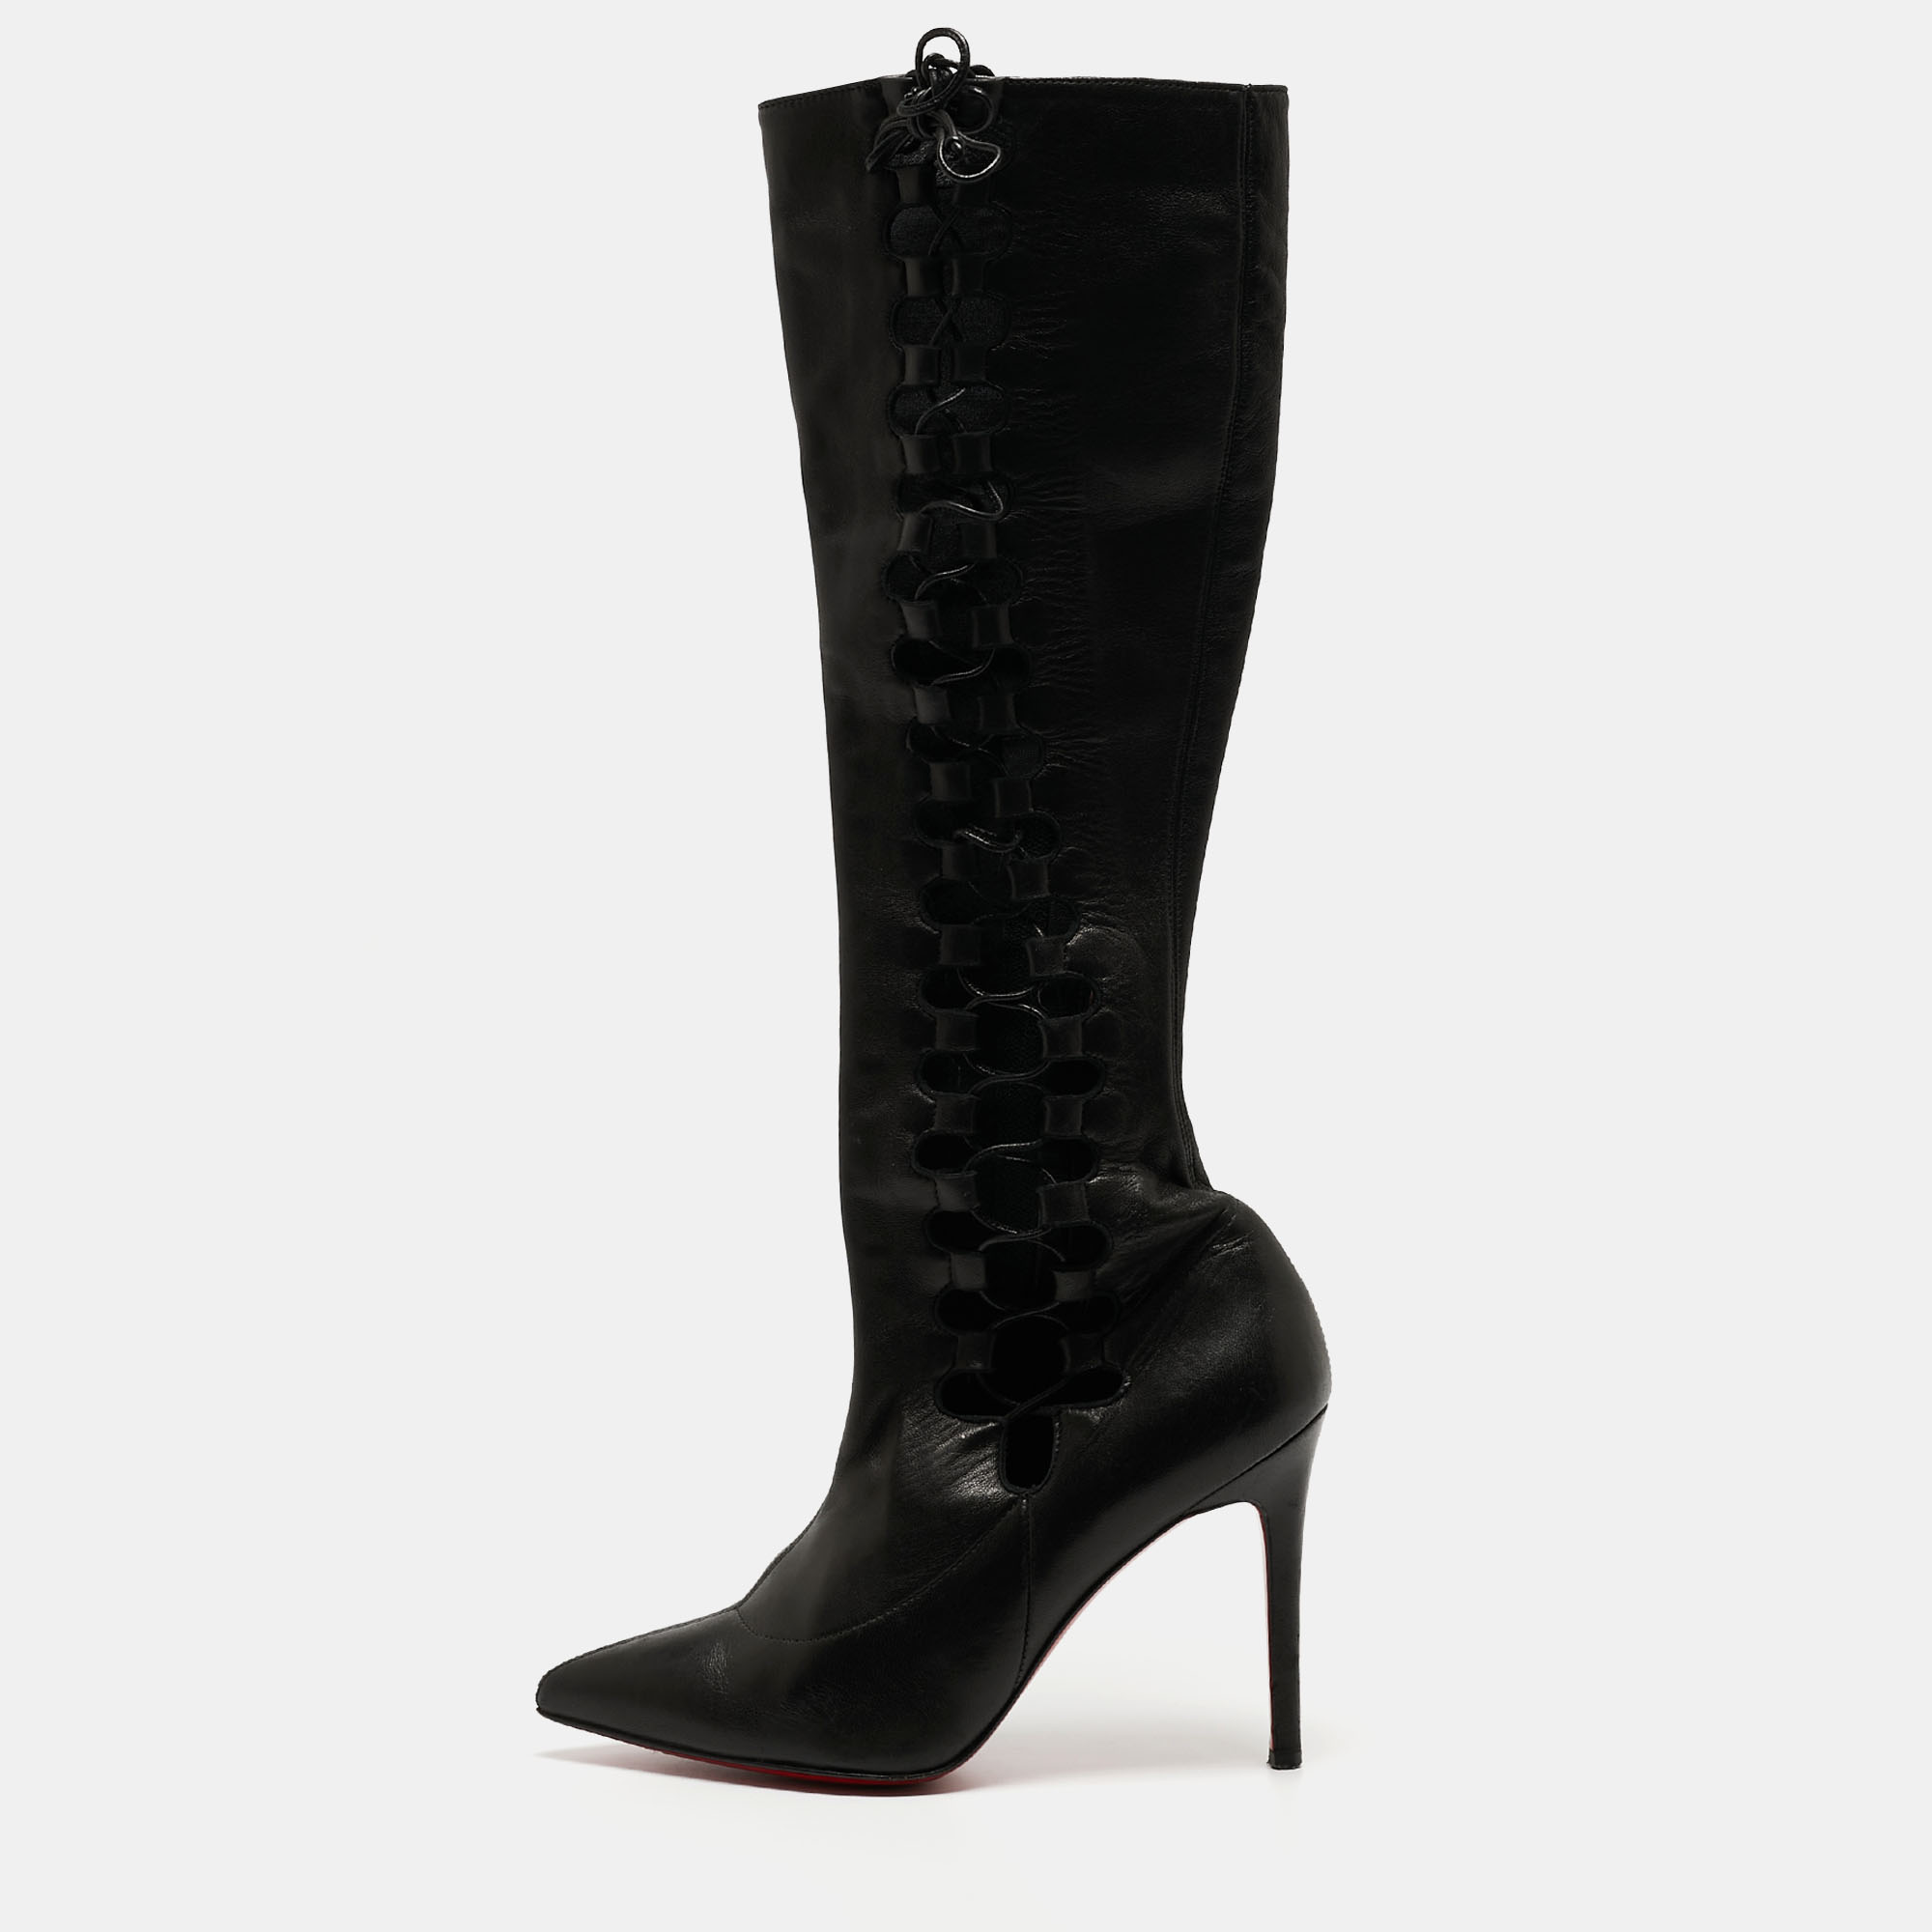 Christian louboutin black leather sempre knee length boots size 37